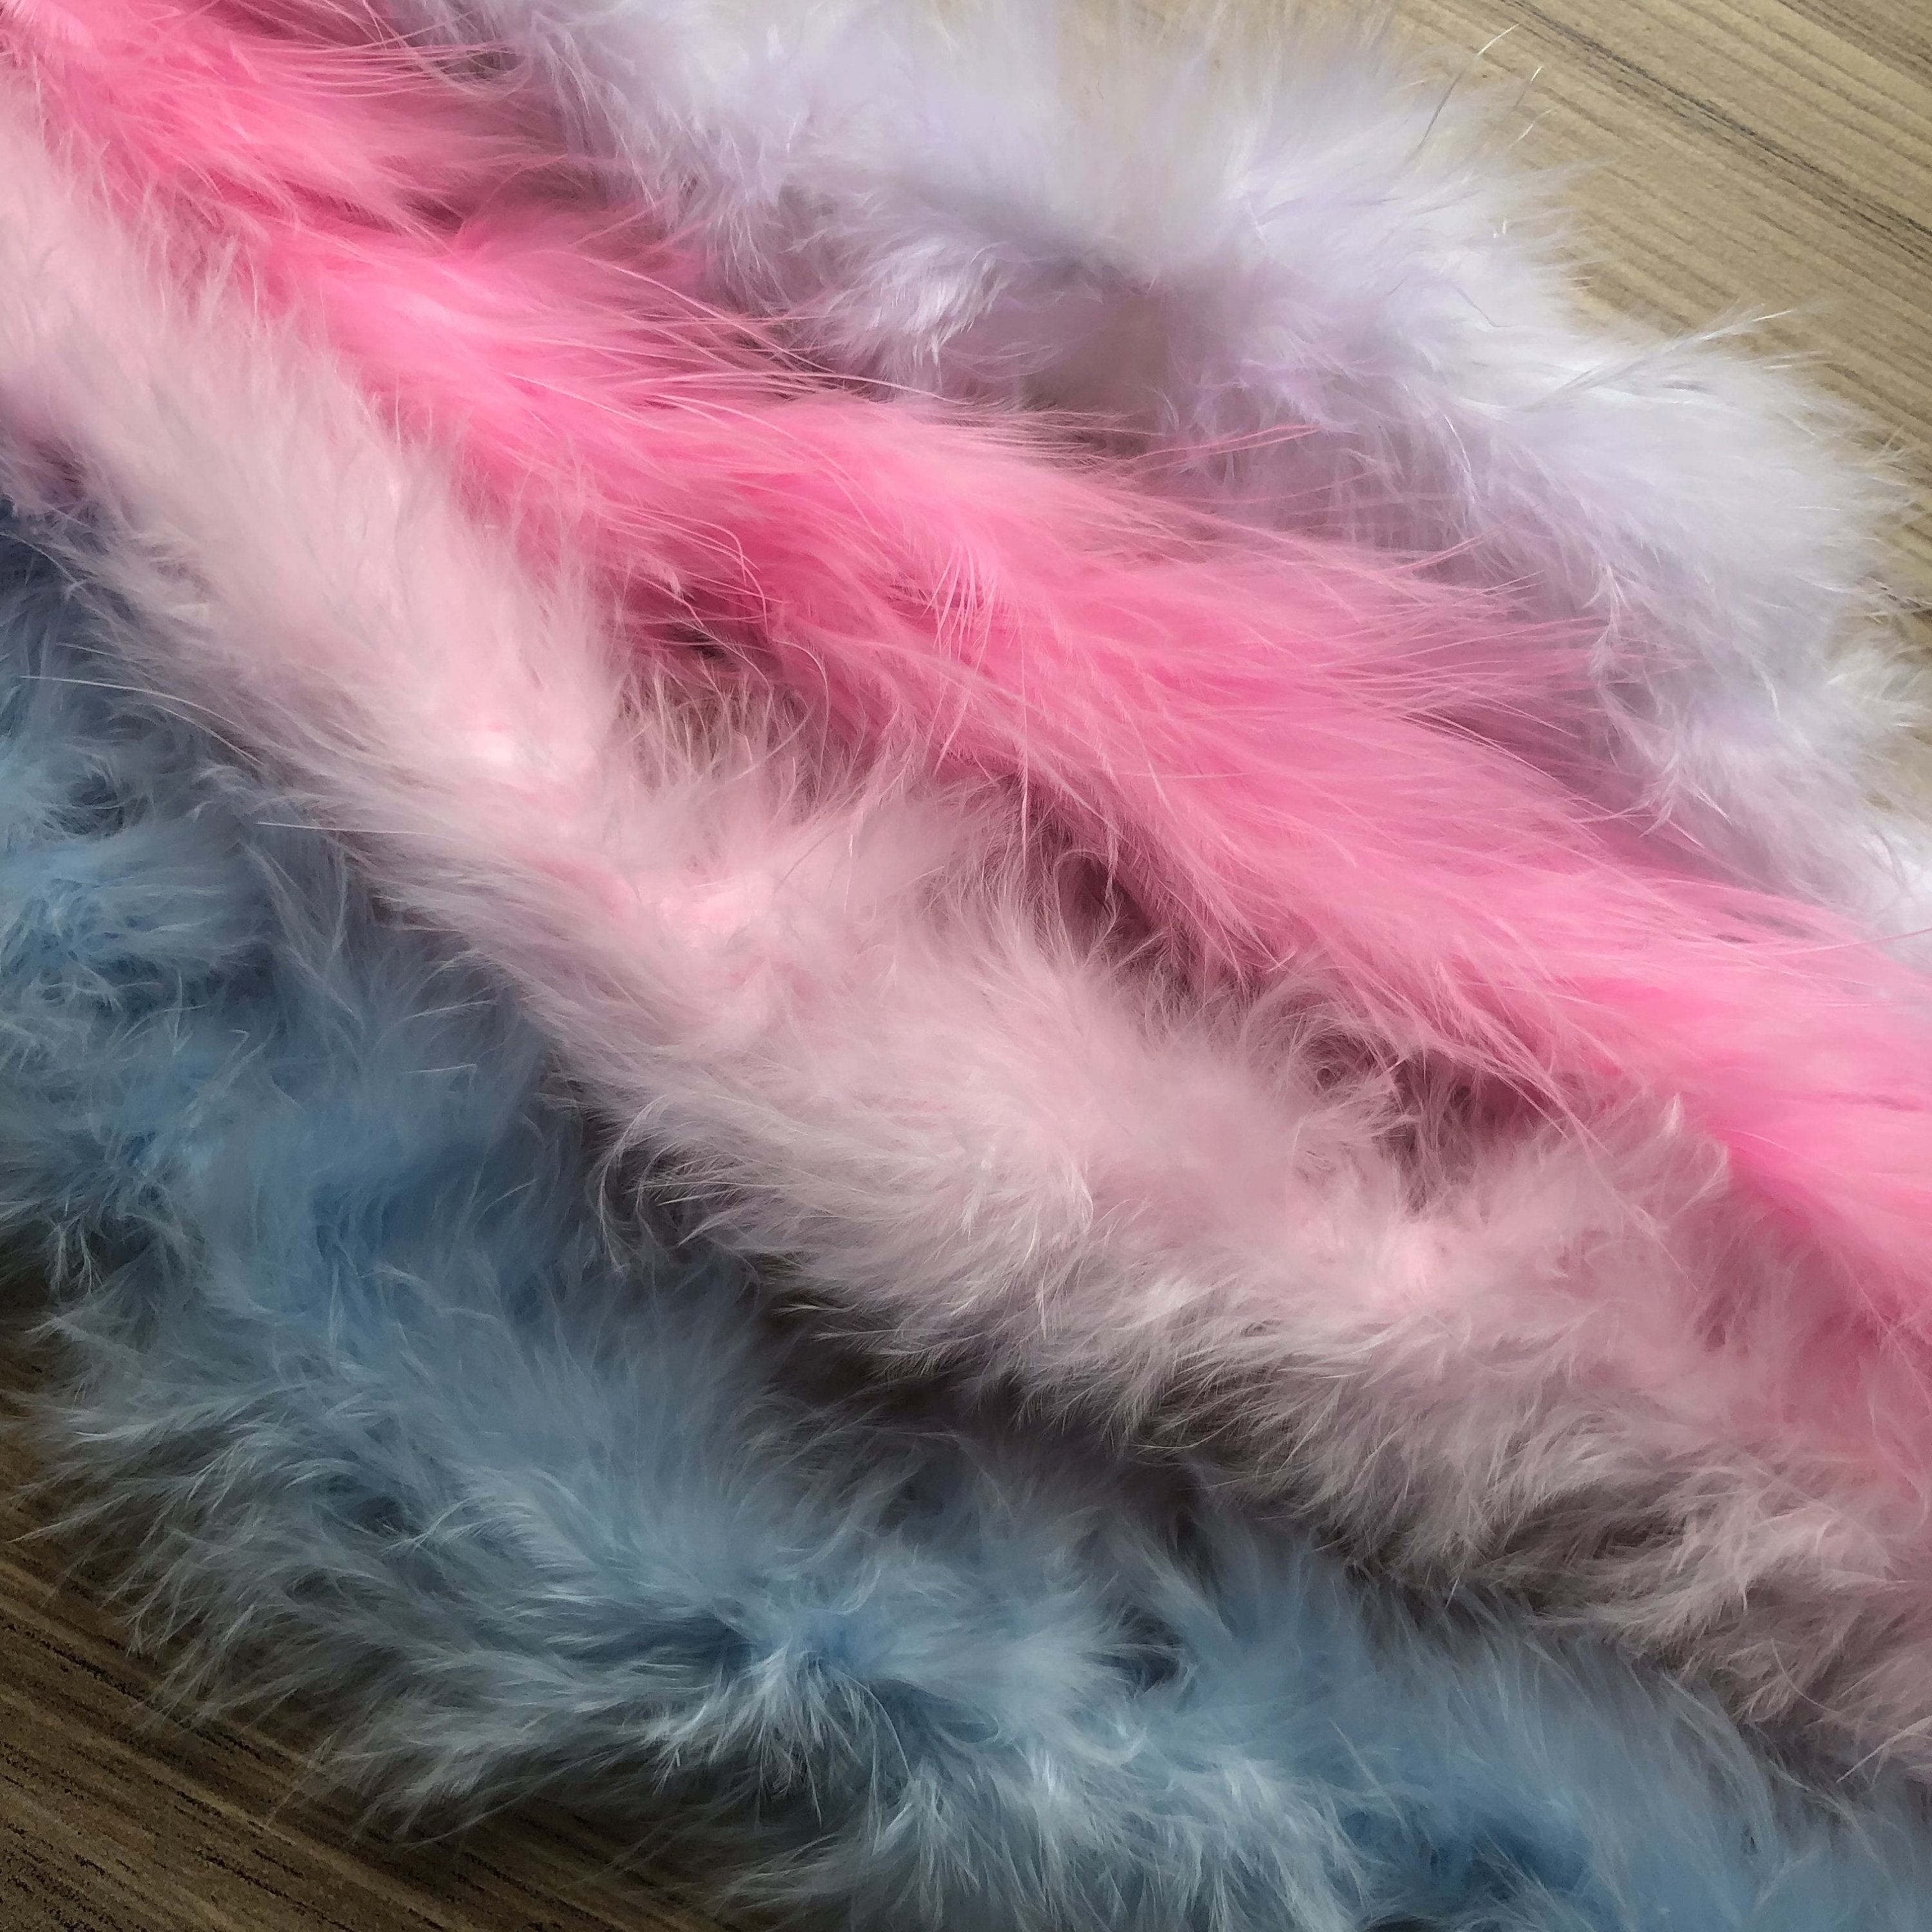 Lyrow 6 Pcs Boas Bulk 6.6 ft Party Colorful Feather for Women Christmas Costume Dancing Wedding Dress Up DIY Accessories